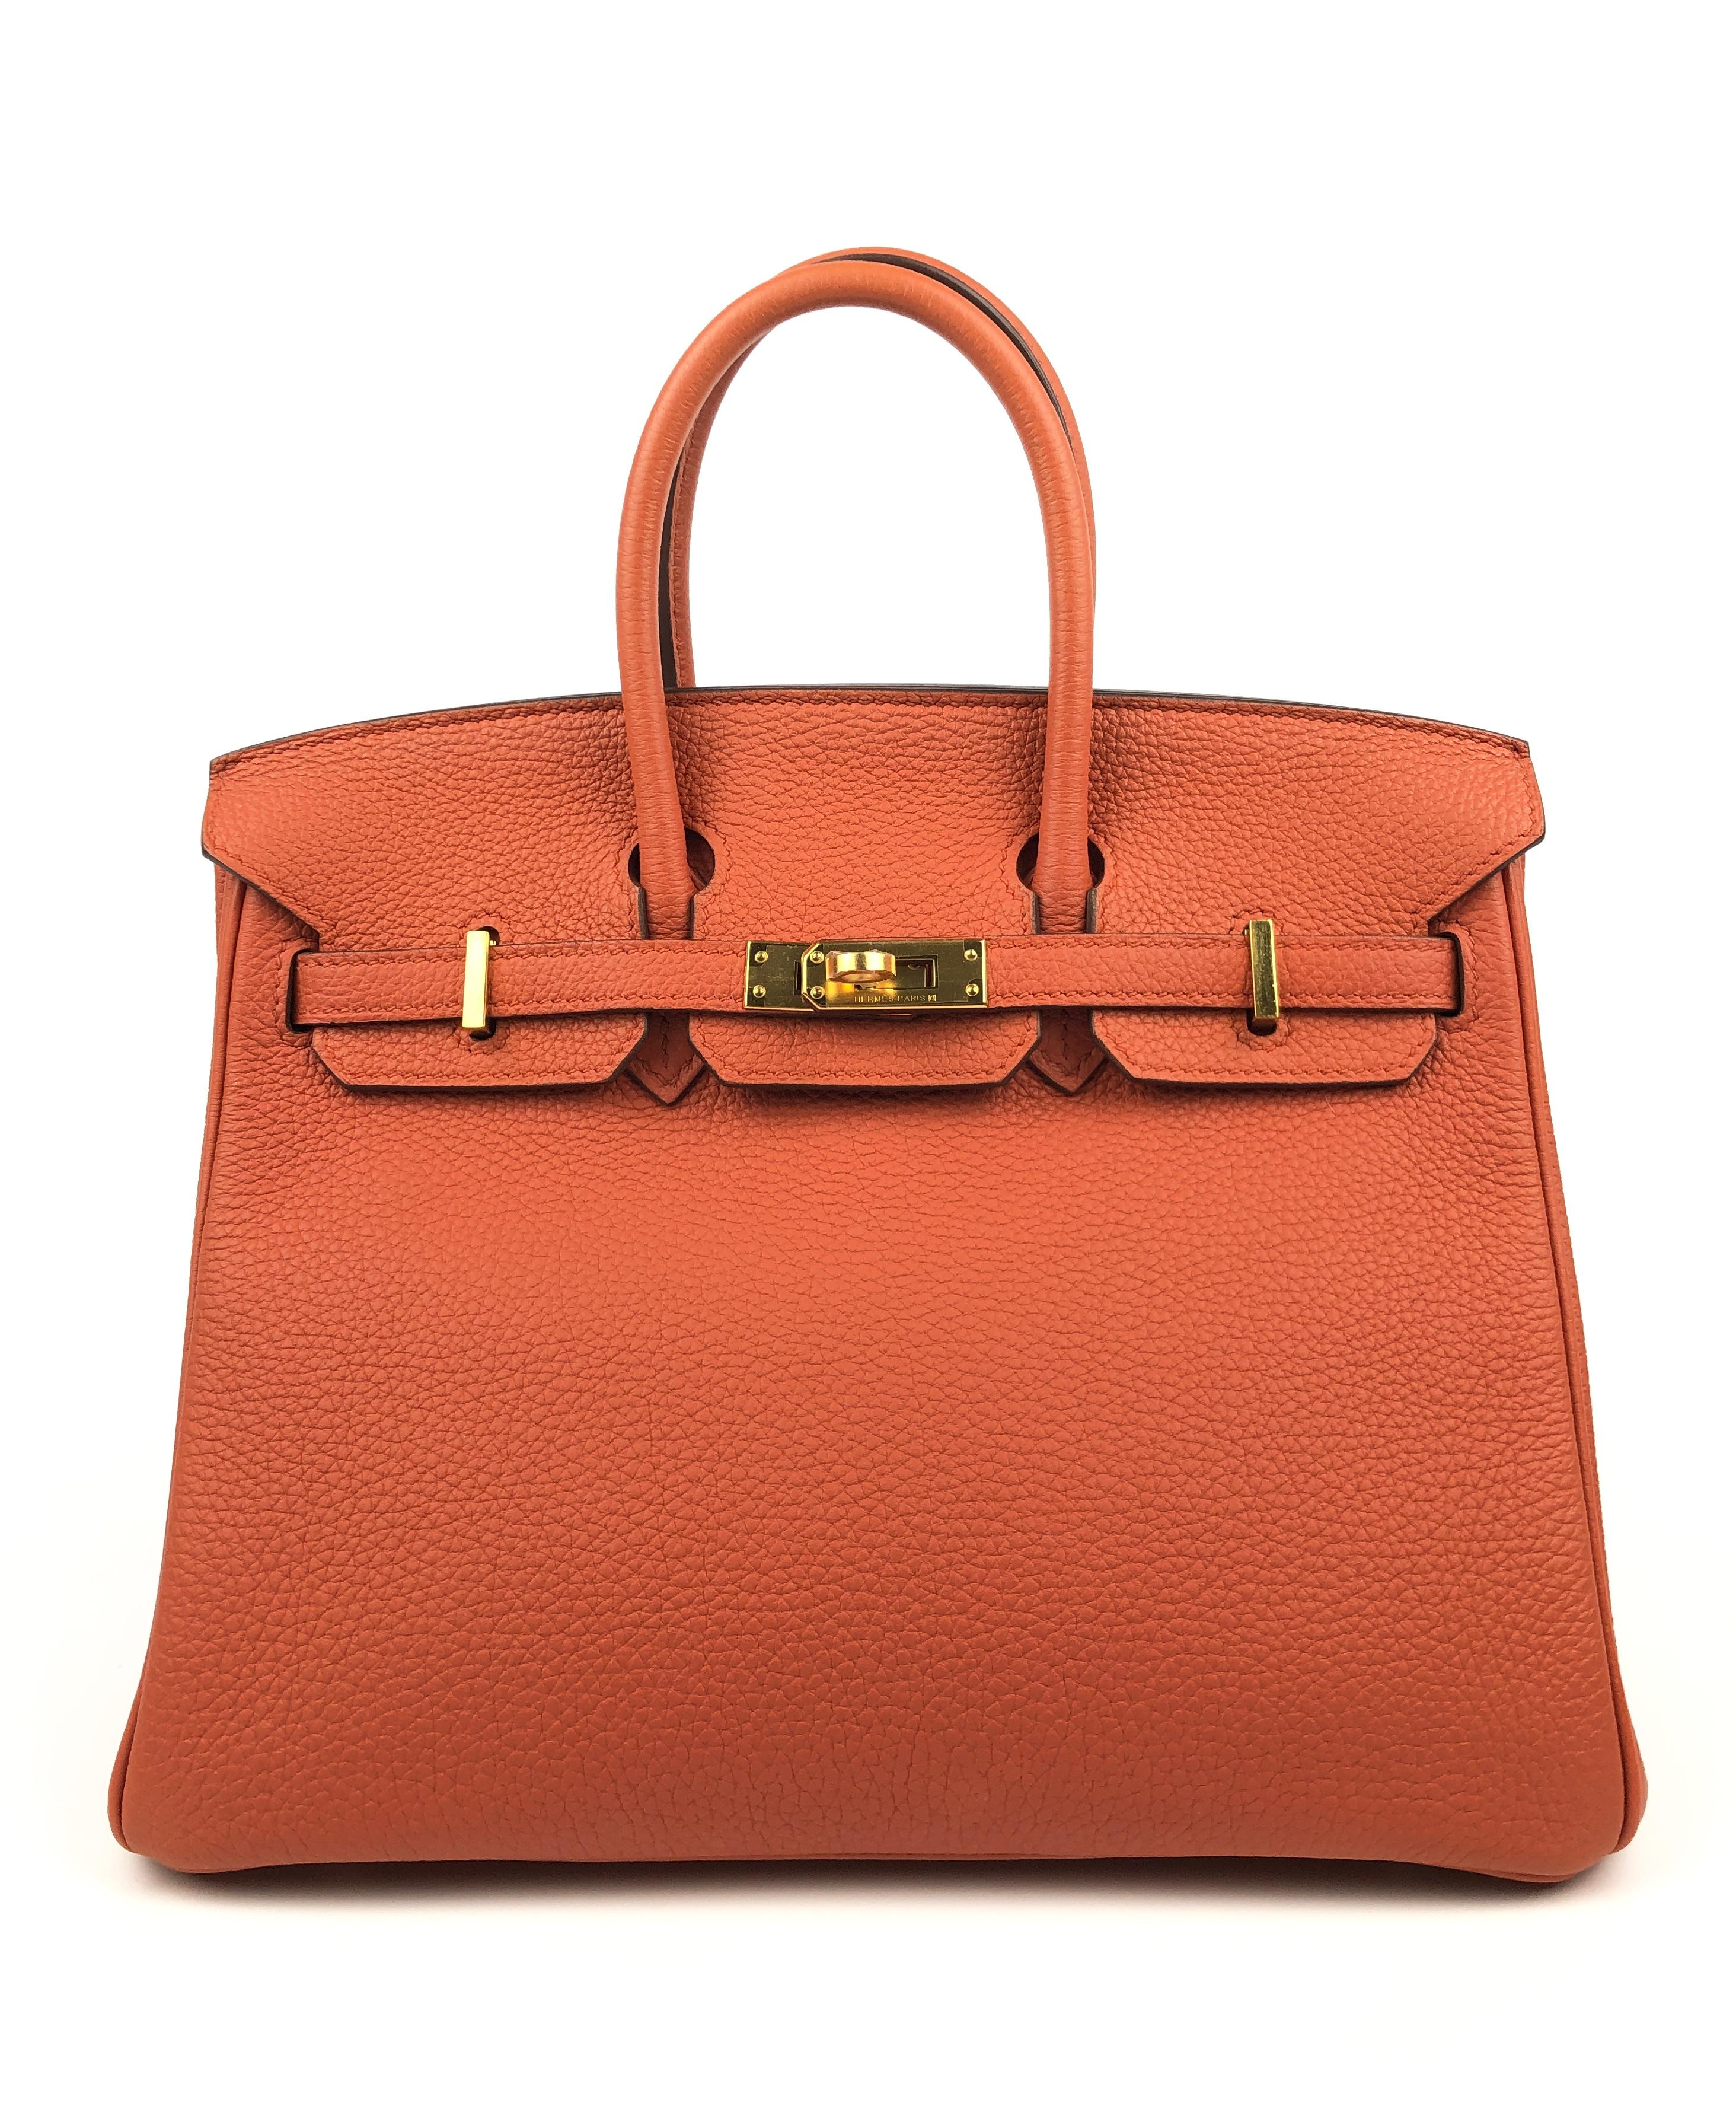 Rare and The Only One on 1stDibs! Hermes Birkin 25 Terre Battue Orange Togo Leather Gold Hardware. Pristine Condition with Plastic on Hardware, perfect corners and structure. X Stamp 2016.

Shop With Confidence from Lux Addicts. We are a Platinum